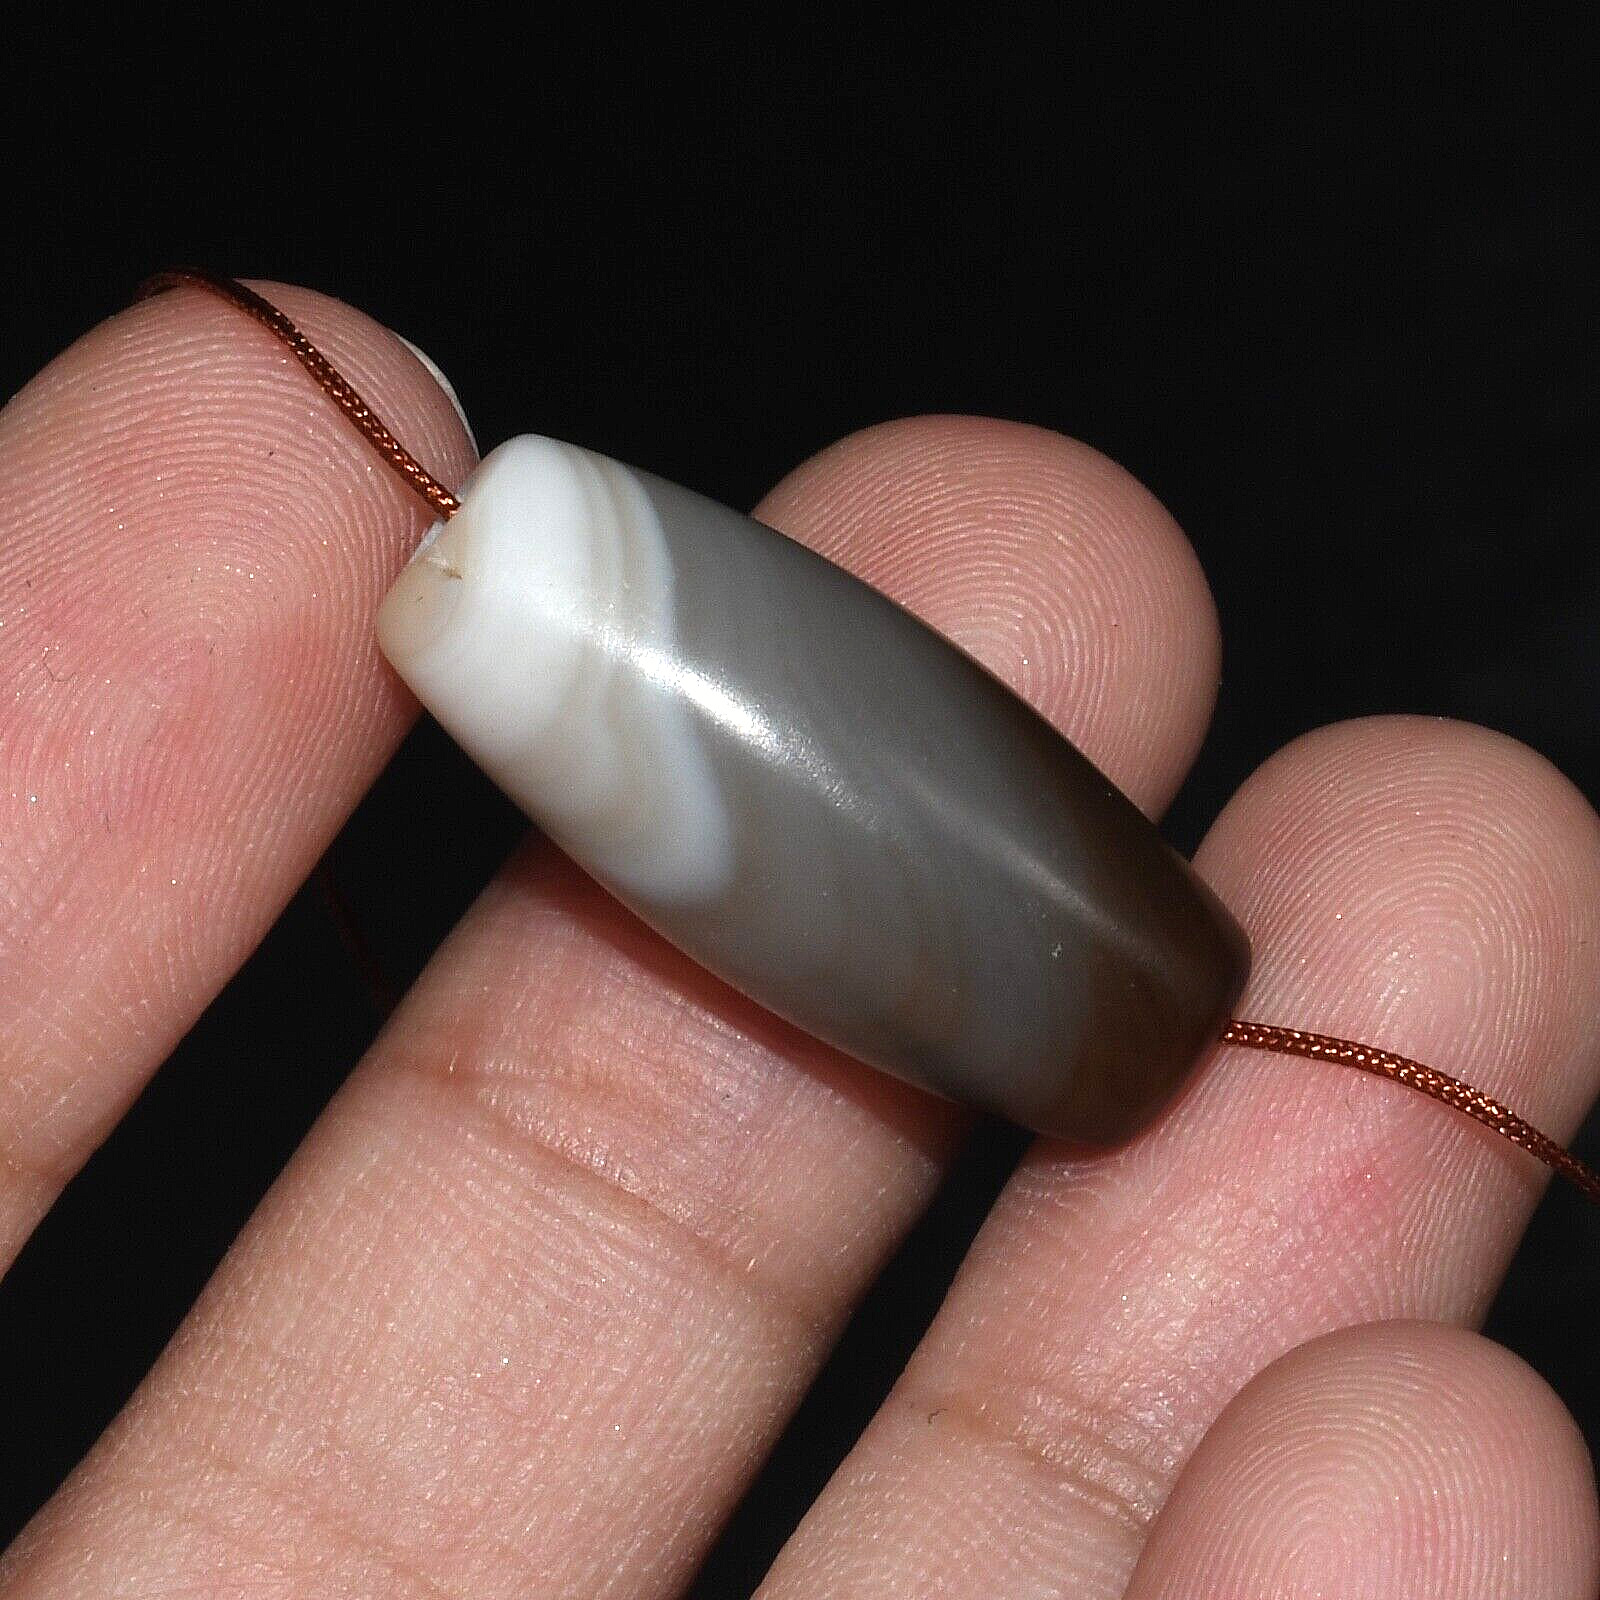 Authentic Ancient Near Eastern Banded Agate Stone Bead over 1200 Years Old